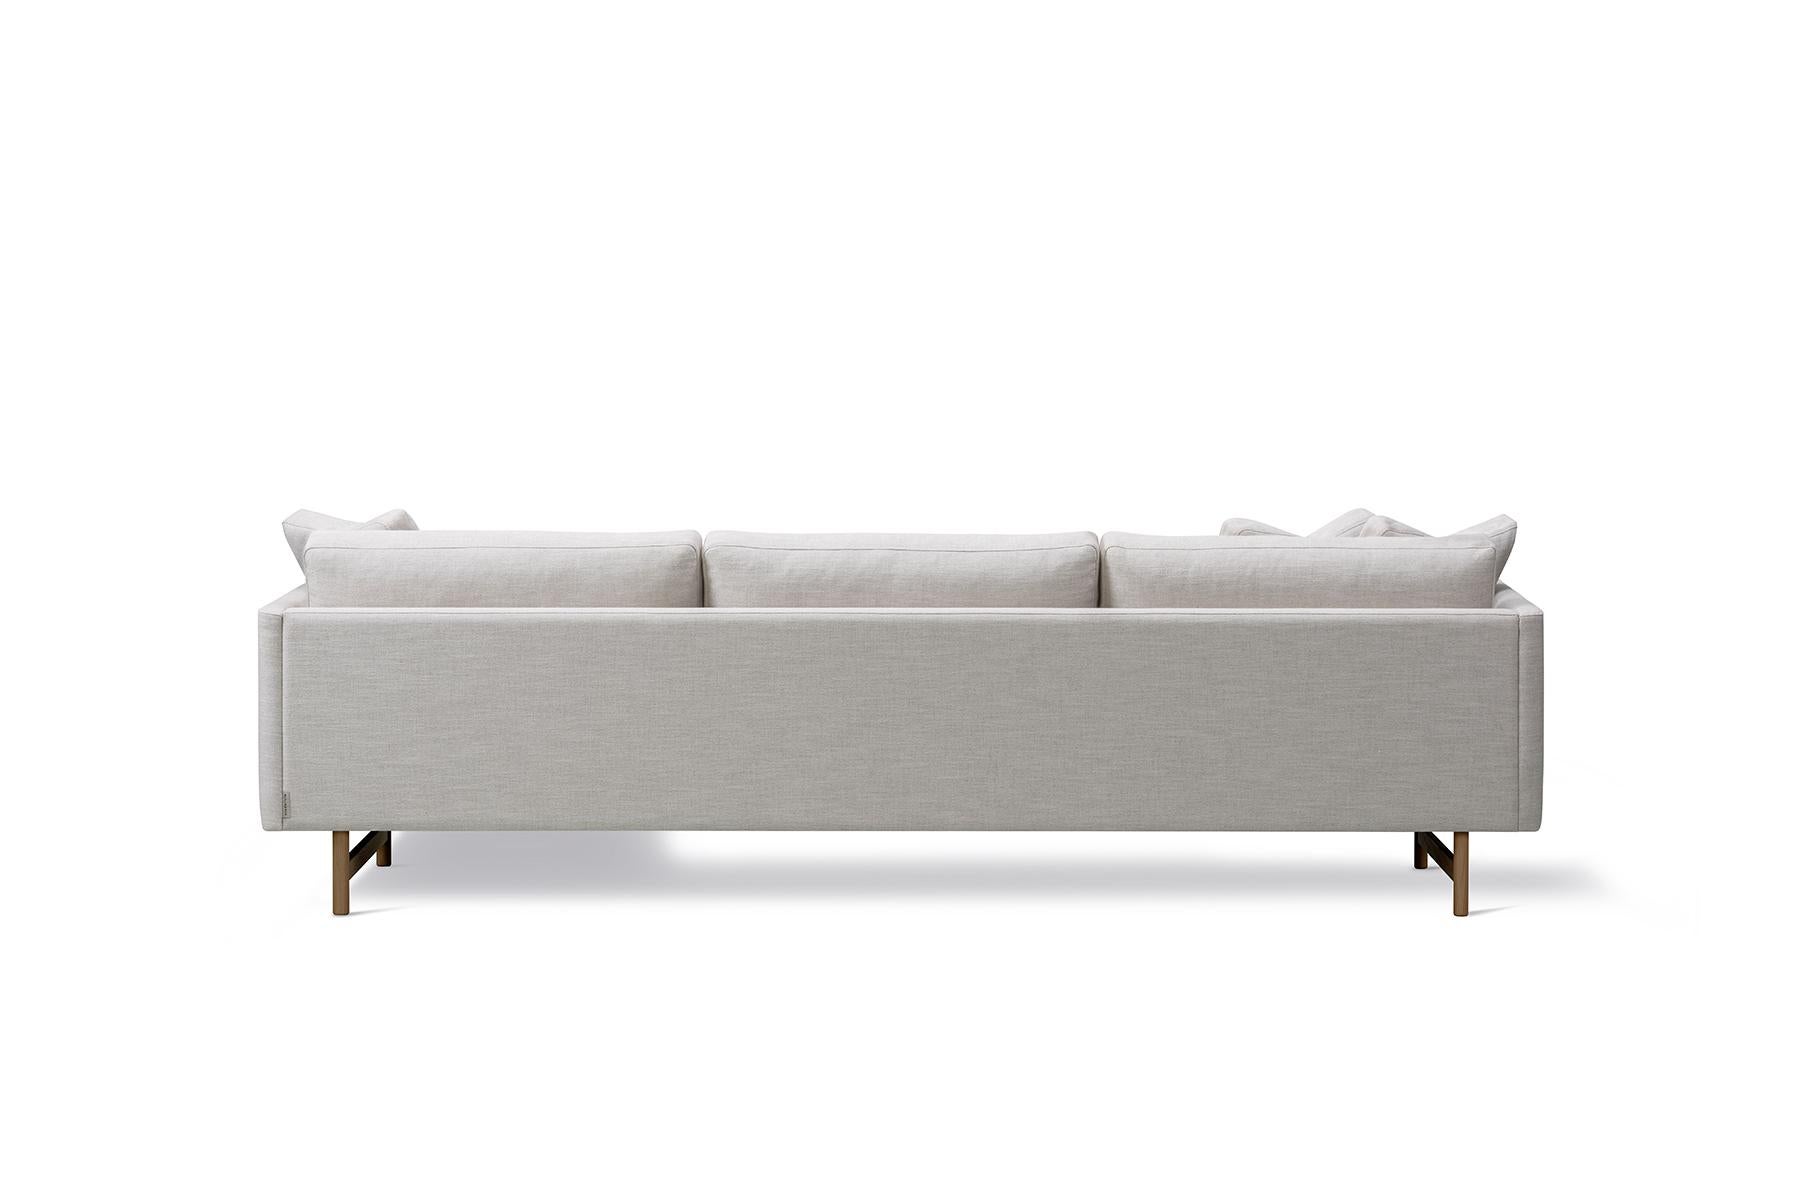 Hugo Passos Calmo sofa 80 – 3-seater – chaise – wood base is simple and serene in this expansive 3-seater Calmo sofa, where straight lines converge with discrete curved details. Comfy cushions complete the picture in this understated expression of